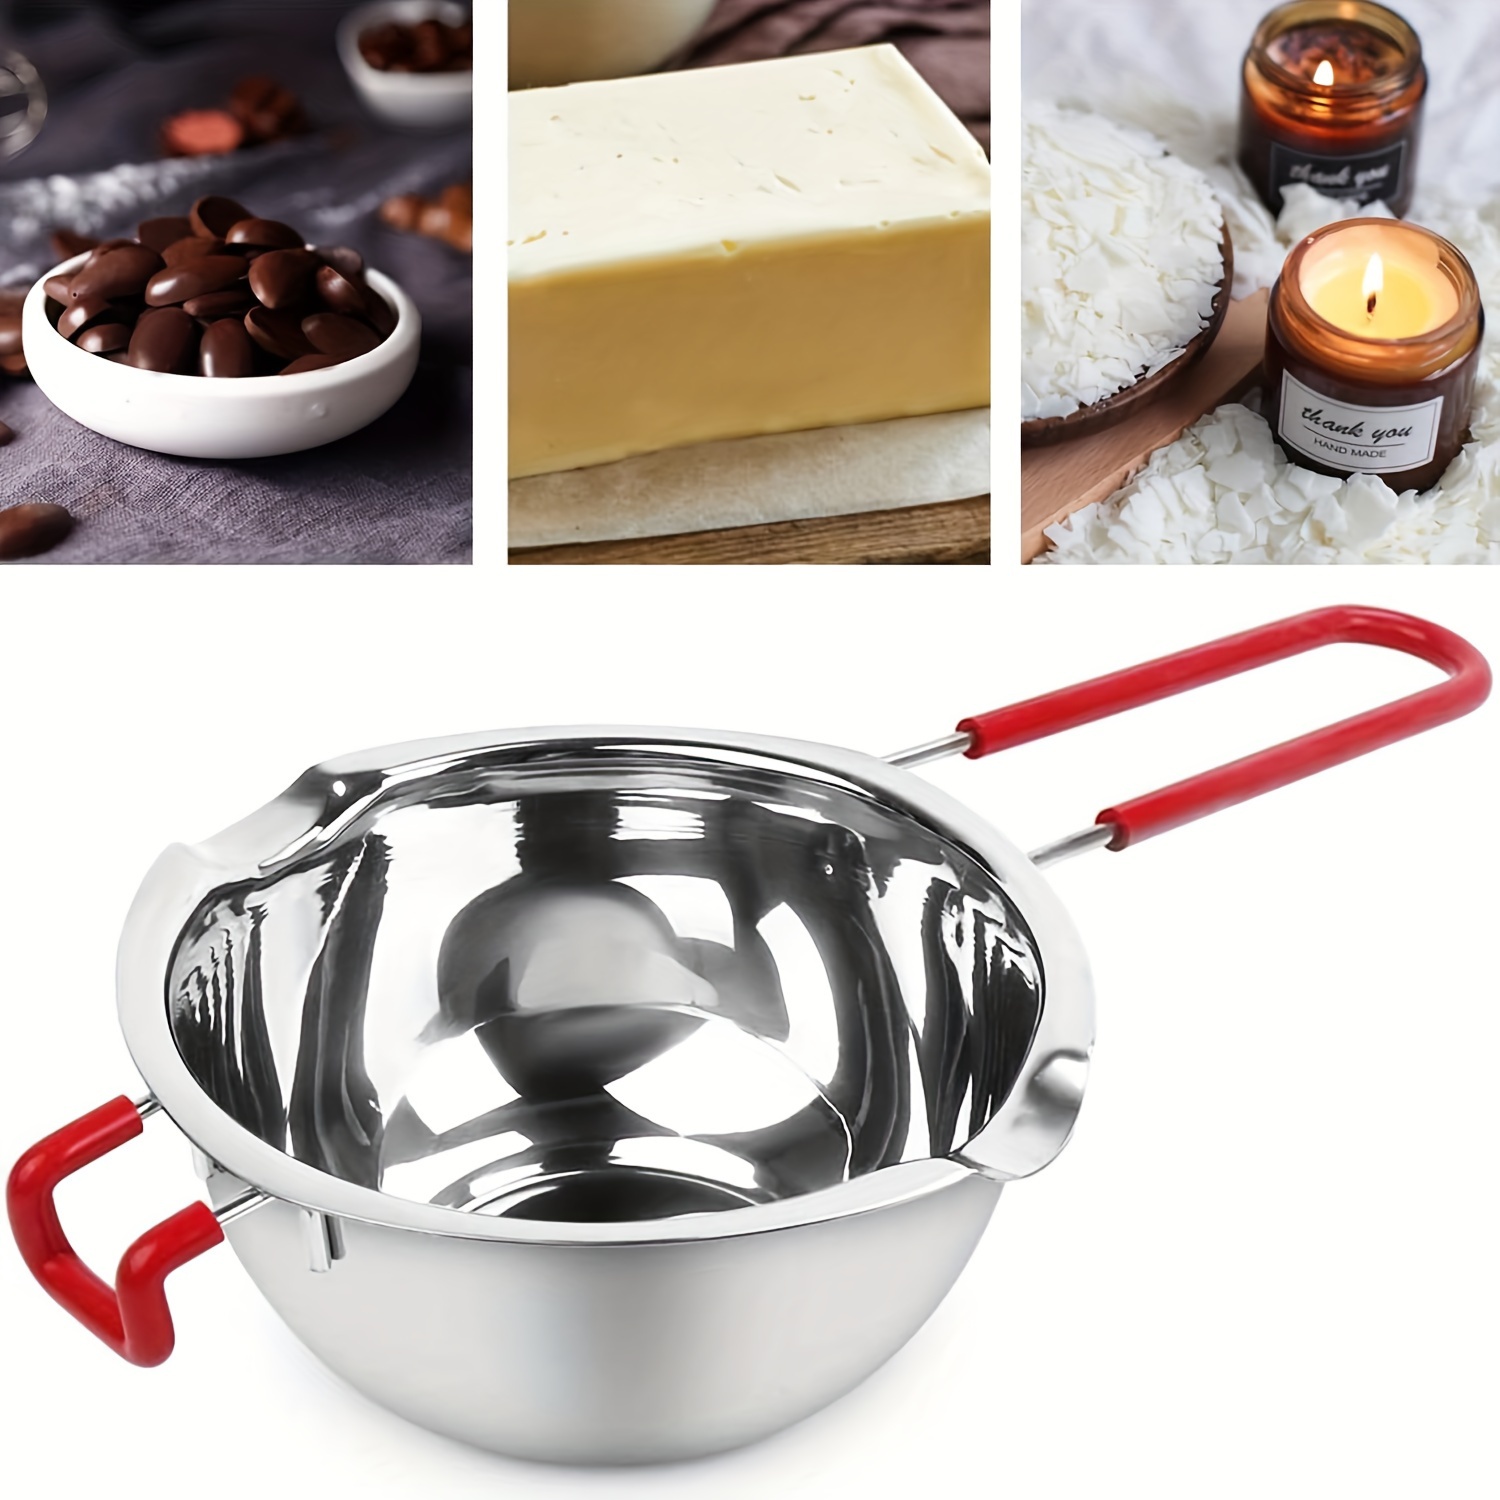 Stainless Steel Double Boiler Pot for Melting Chocolate Butter Cheese DIY  Candy Candles Making Tool with Handle Kitchen Bakeware